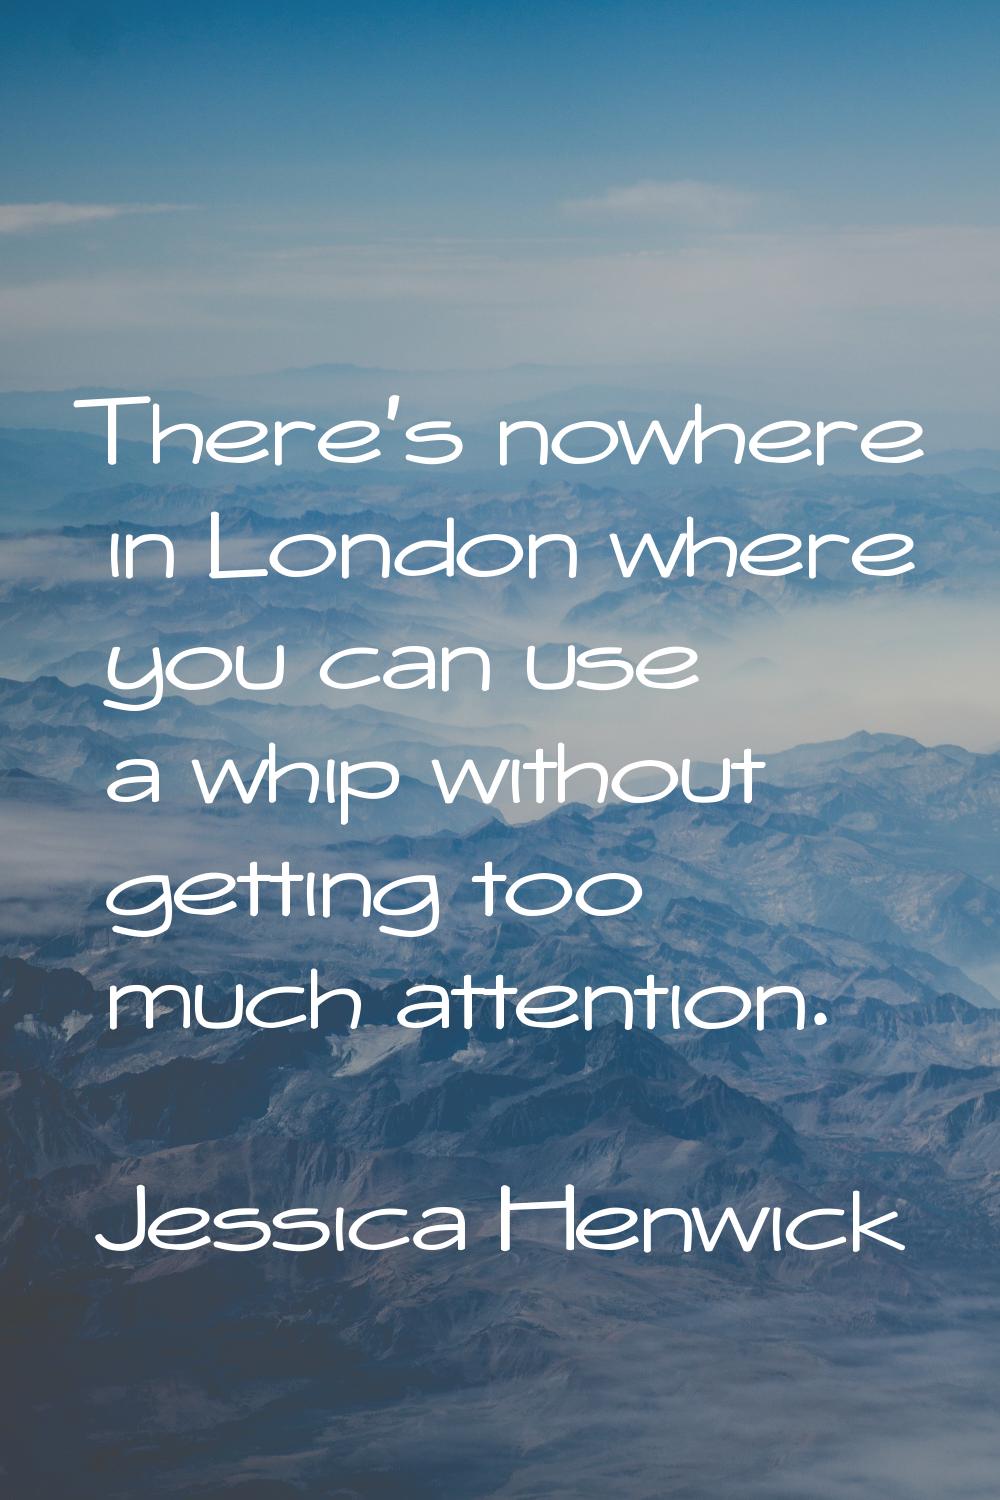 There's nowhere in London where you can use a whip without getting too much attention.